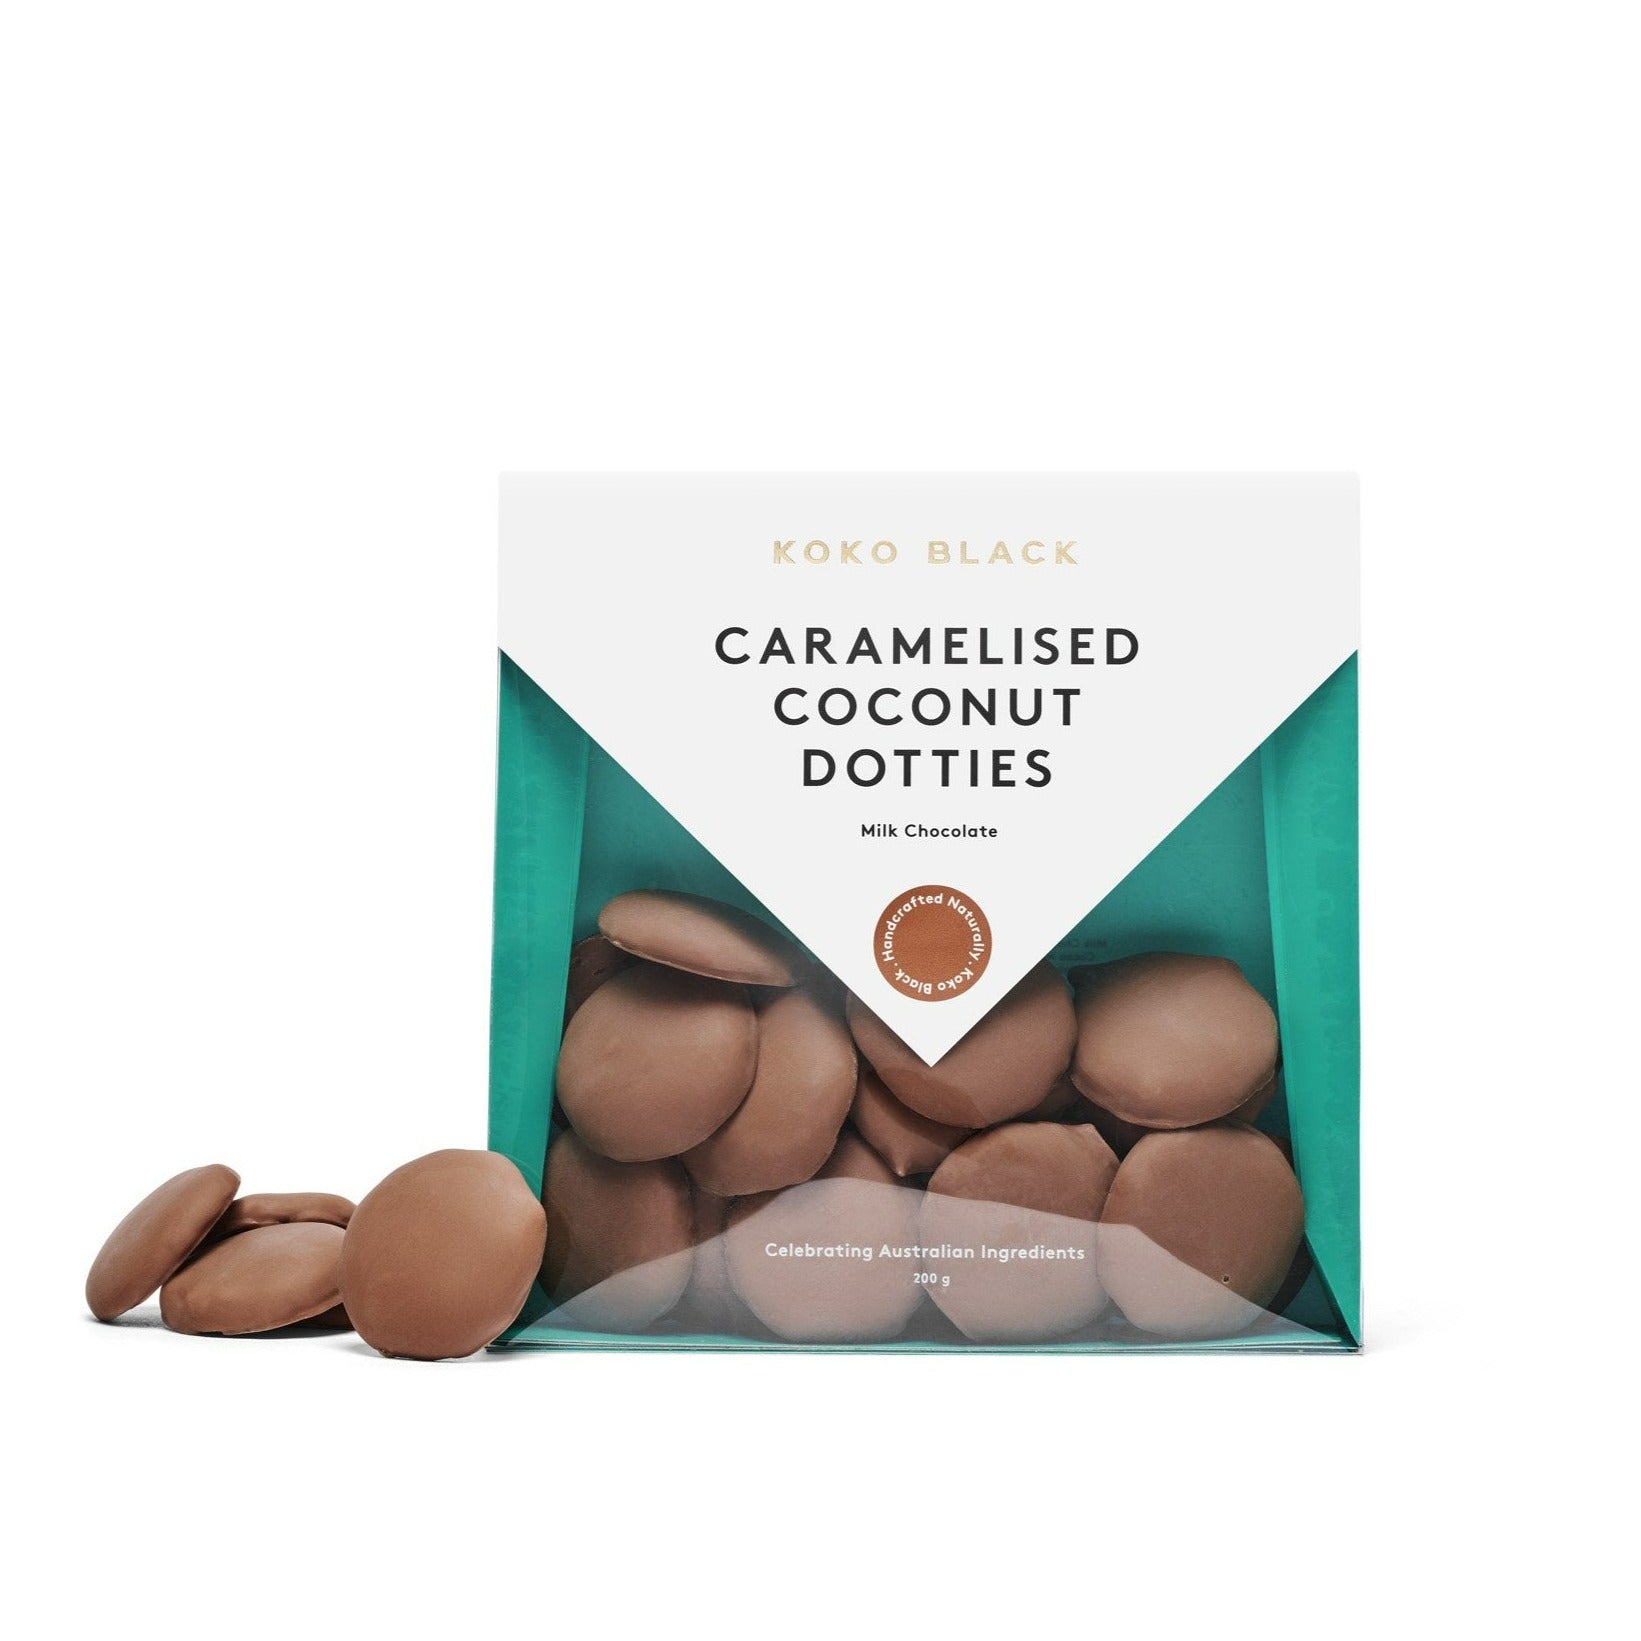 Chocolate rounds to side of packaging